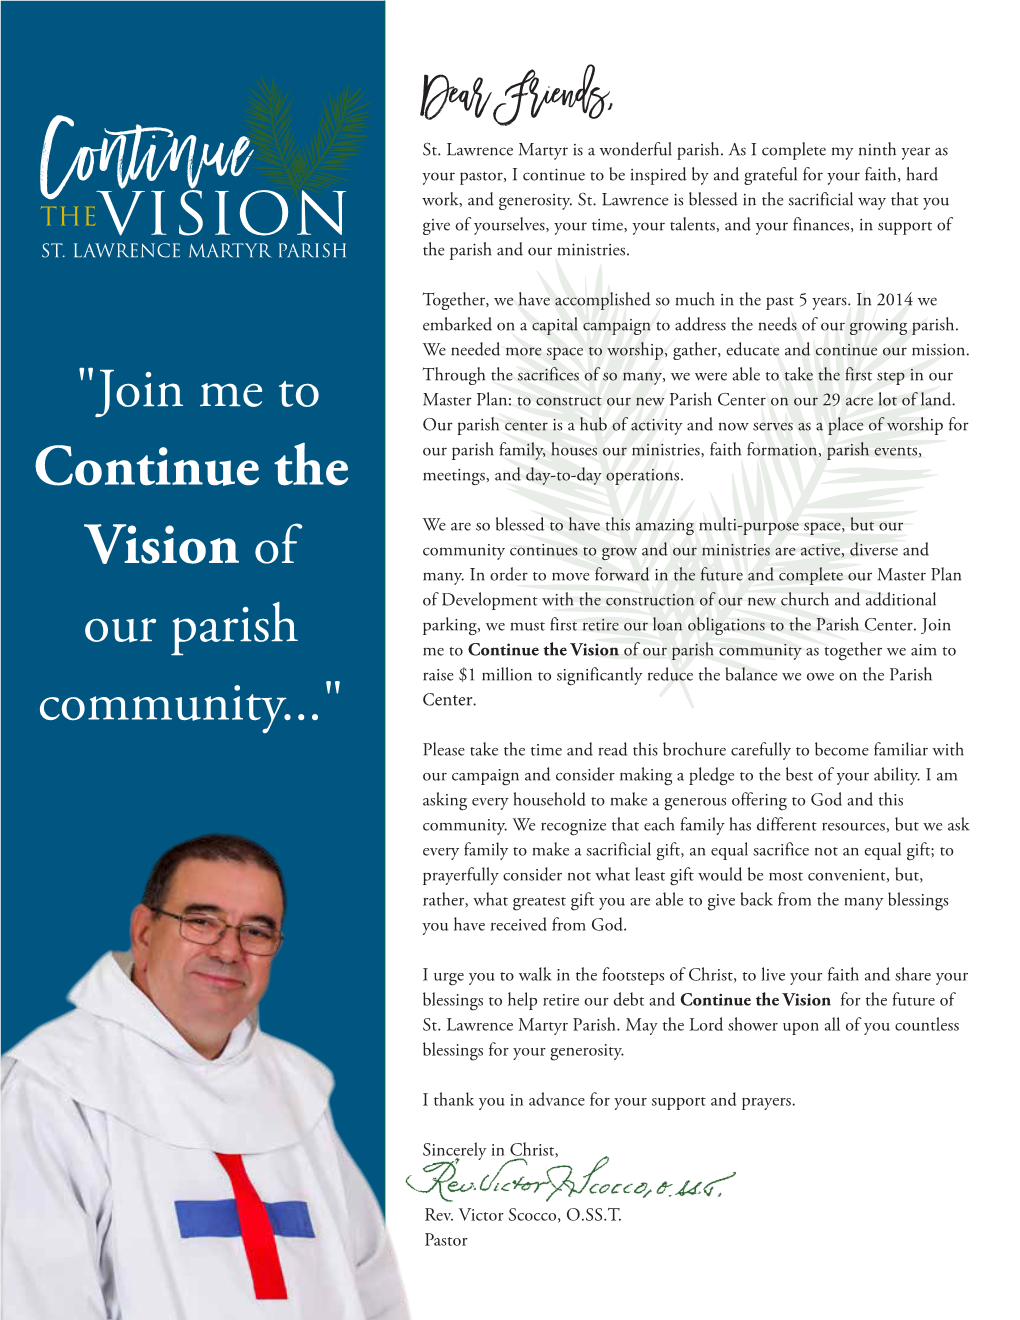 The Vision of Our Parish Community As Together We Aim to Raise $1 Million to Significantly Reduce the Balance We Owe on the Parish Community..." Center